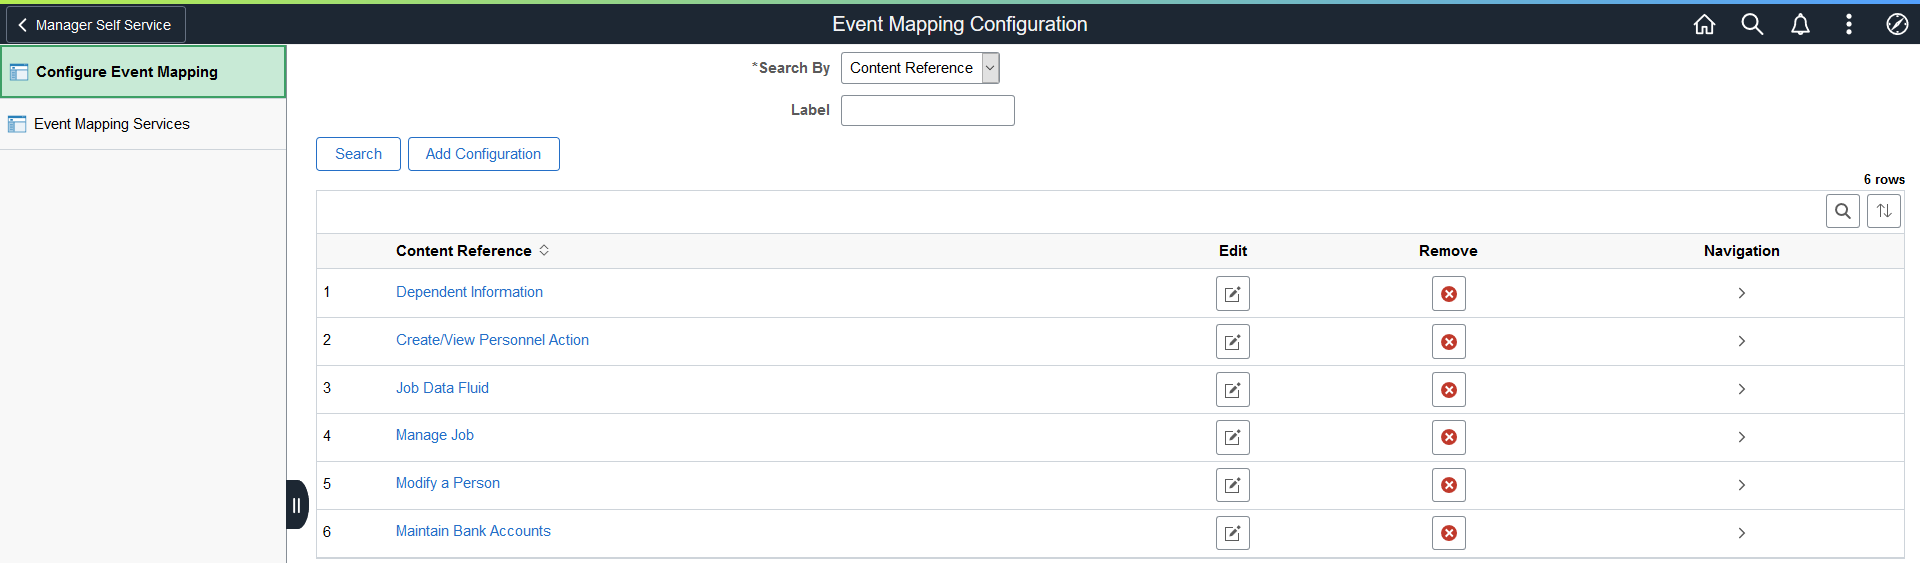 Event Mapping Configuration search page